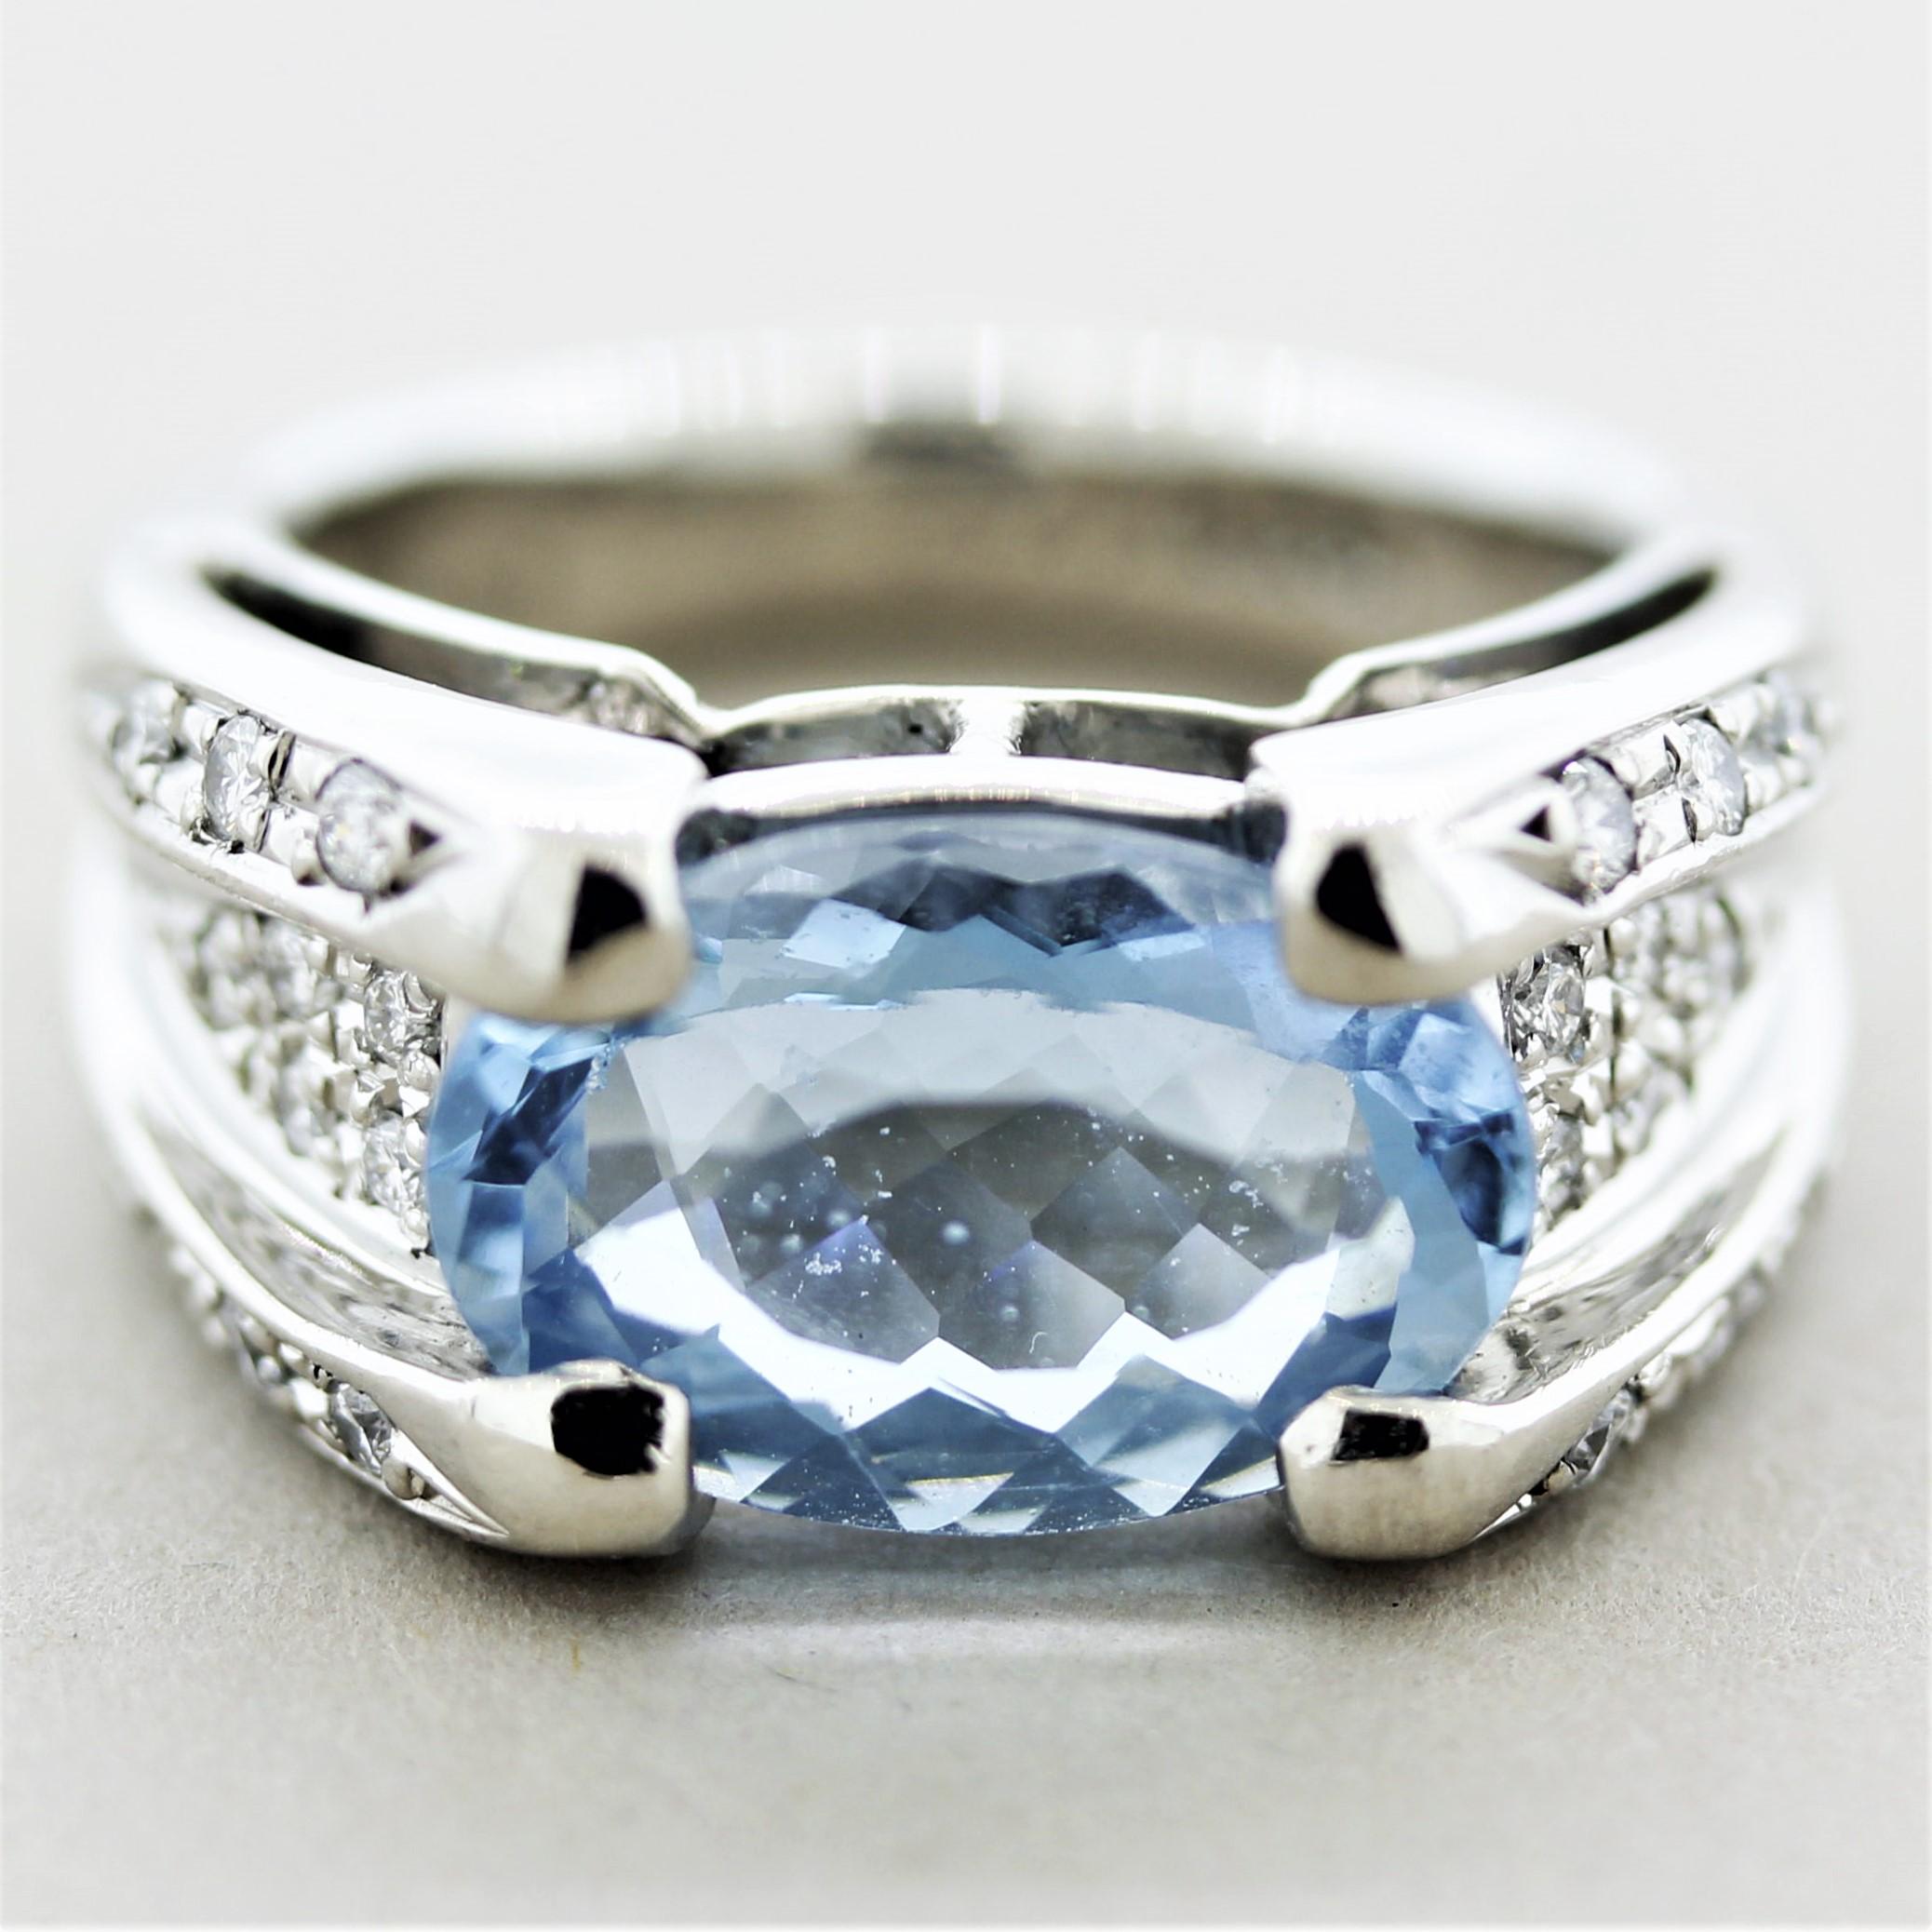 A fabulous ring featuring a 4.42 carat oval-shaped aquamarine! It has a bright sea-blue color with excellent brilliance. It is accented by 0.30 carats of round brilliant-cut diamonds set on the sides of the aqua down the sides of the ring.